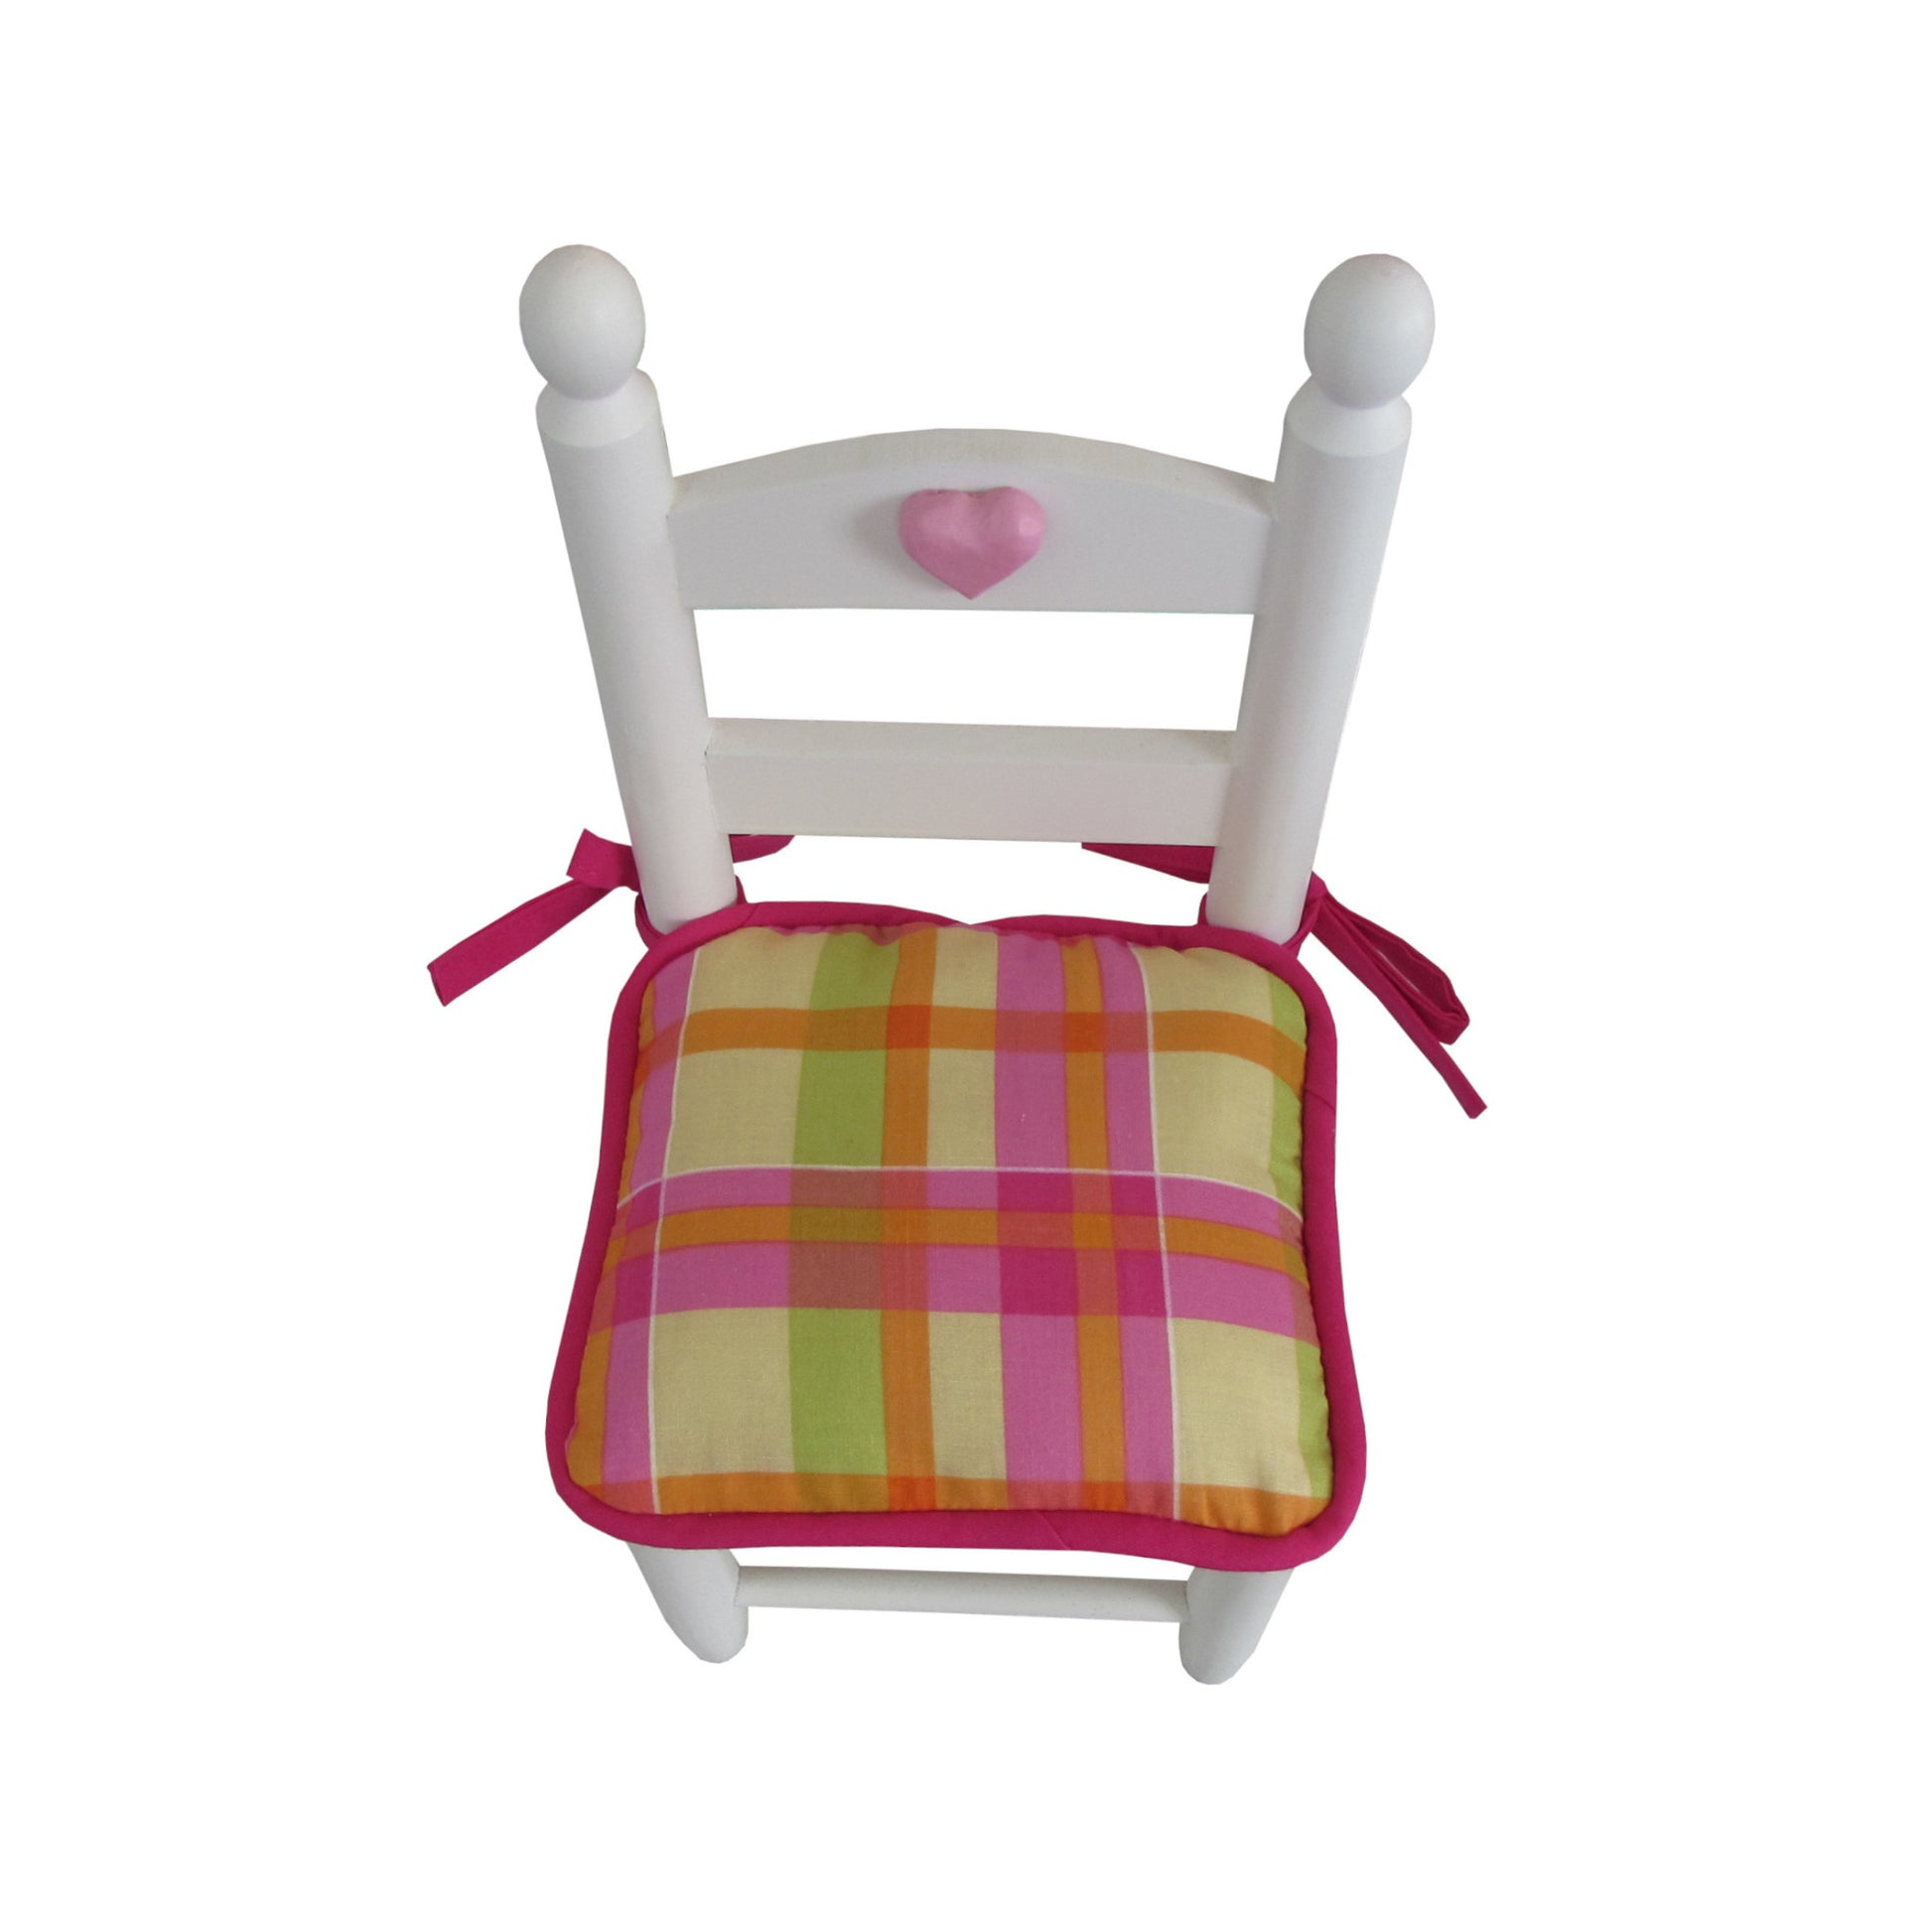 Yellow, Orange, Pink, and Green Plaid Doll Chair Cushion for 18-inch dolls